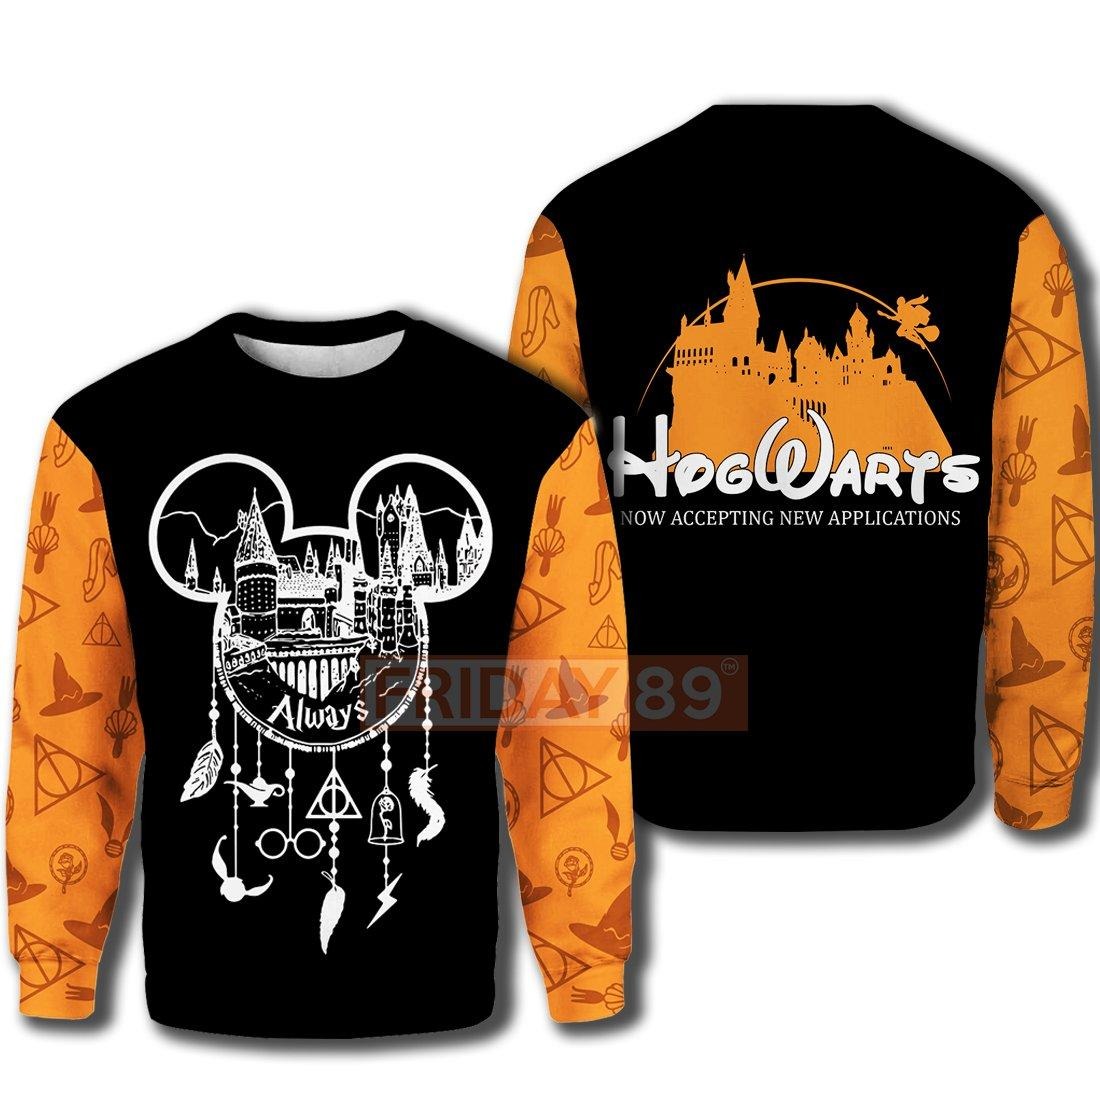 Hogwarts always dreamcatcher now accepting new appilcation 3d hoodie and sweater